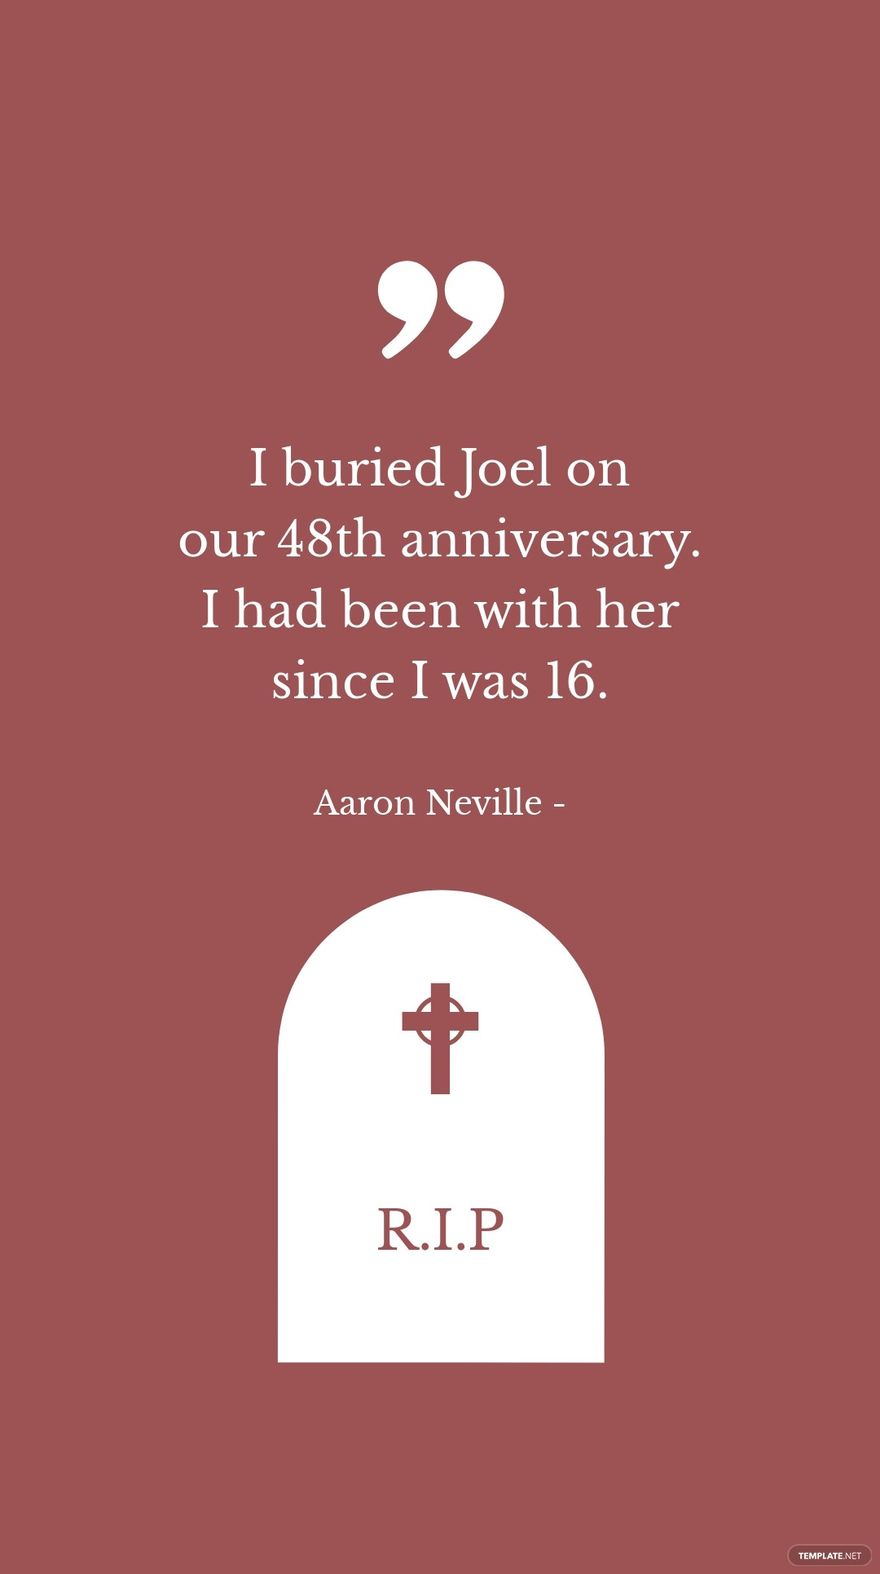 Aaron Neville - I buried Joel on our 48th anniversary. I had been with her since I was 16.